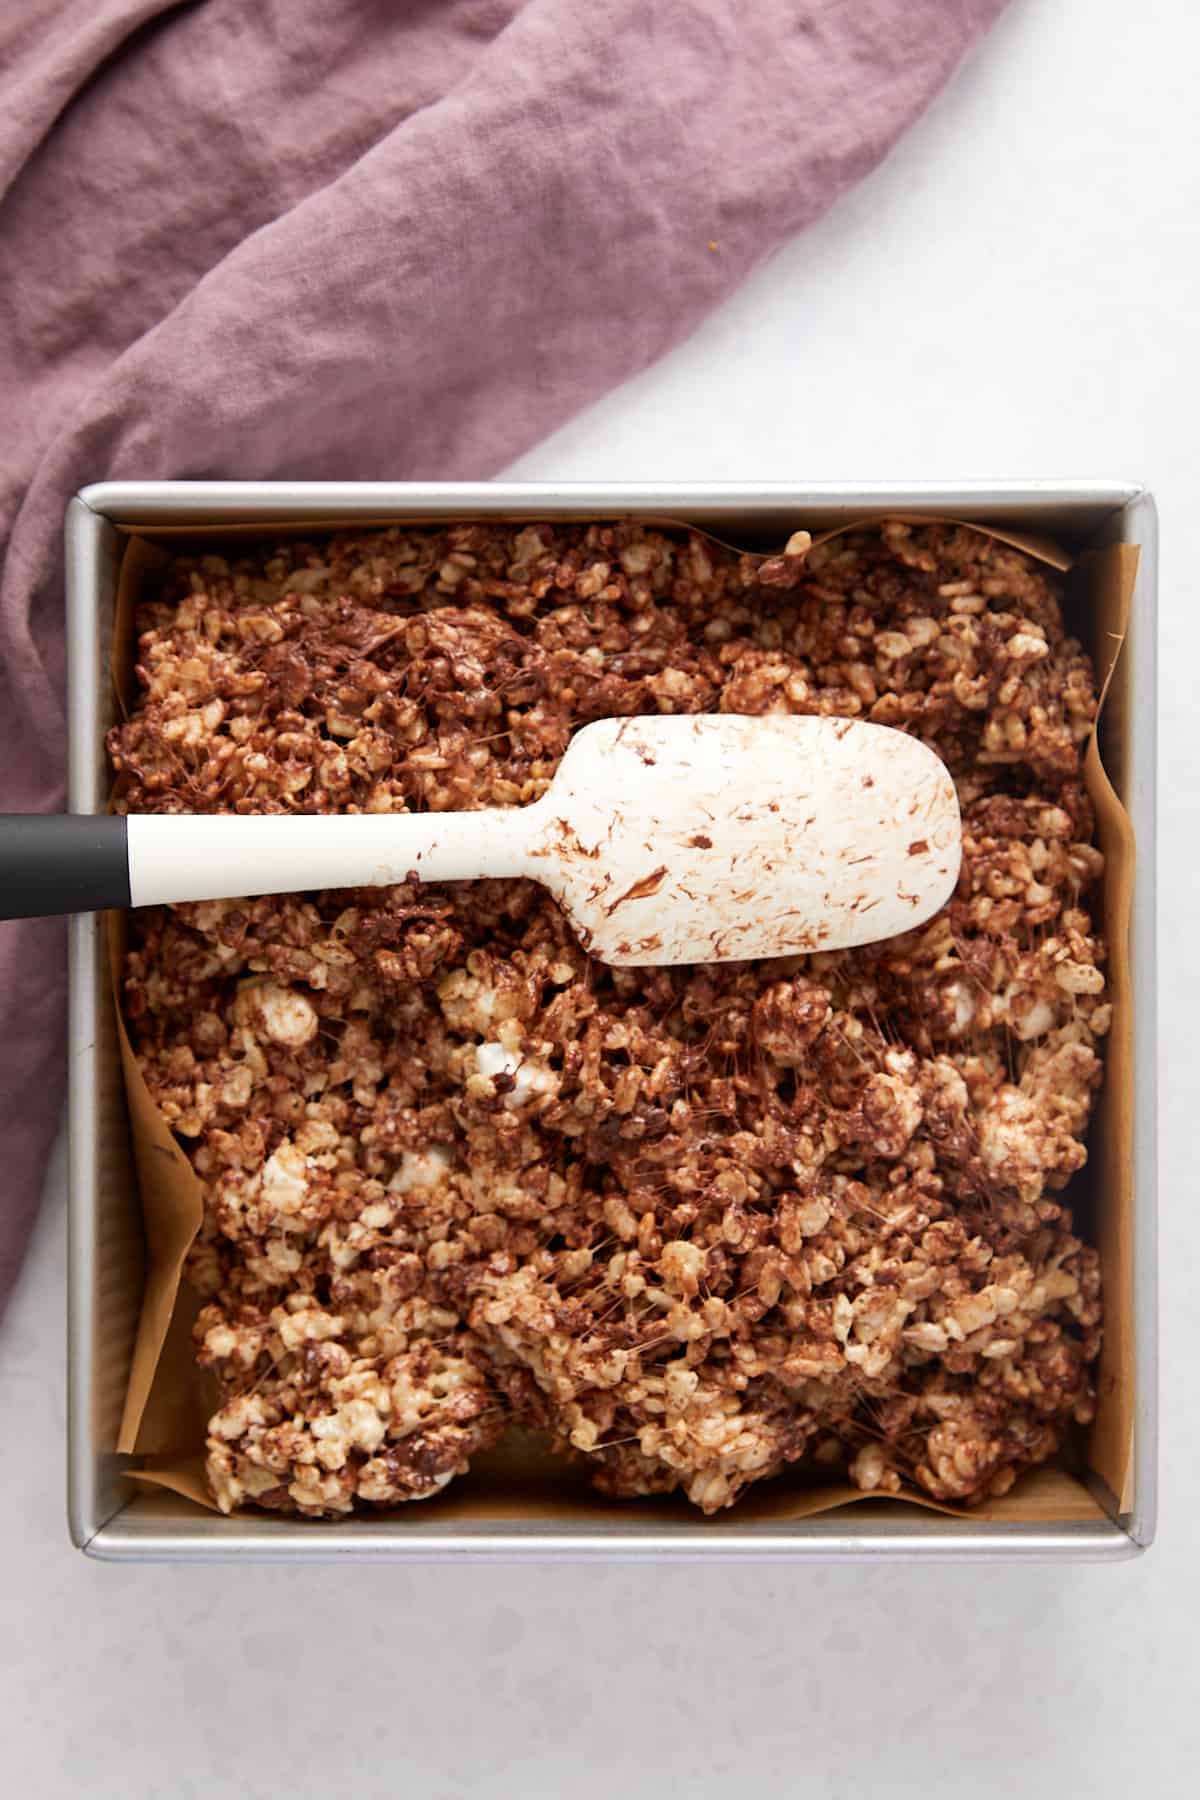 Overhead view of Chocolate chip Rice Krispie treats in pan being spread out with a spatula.